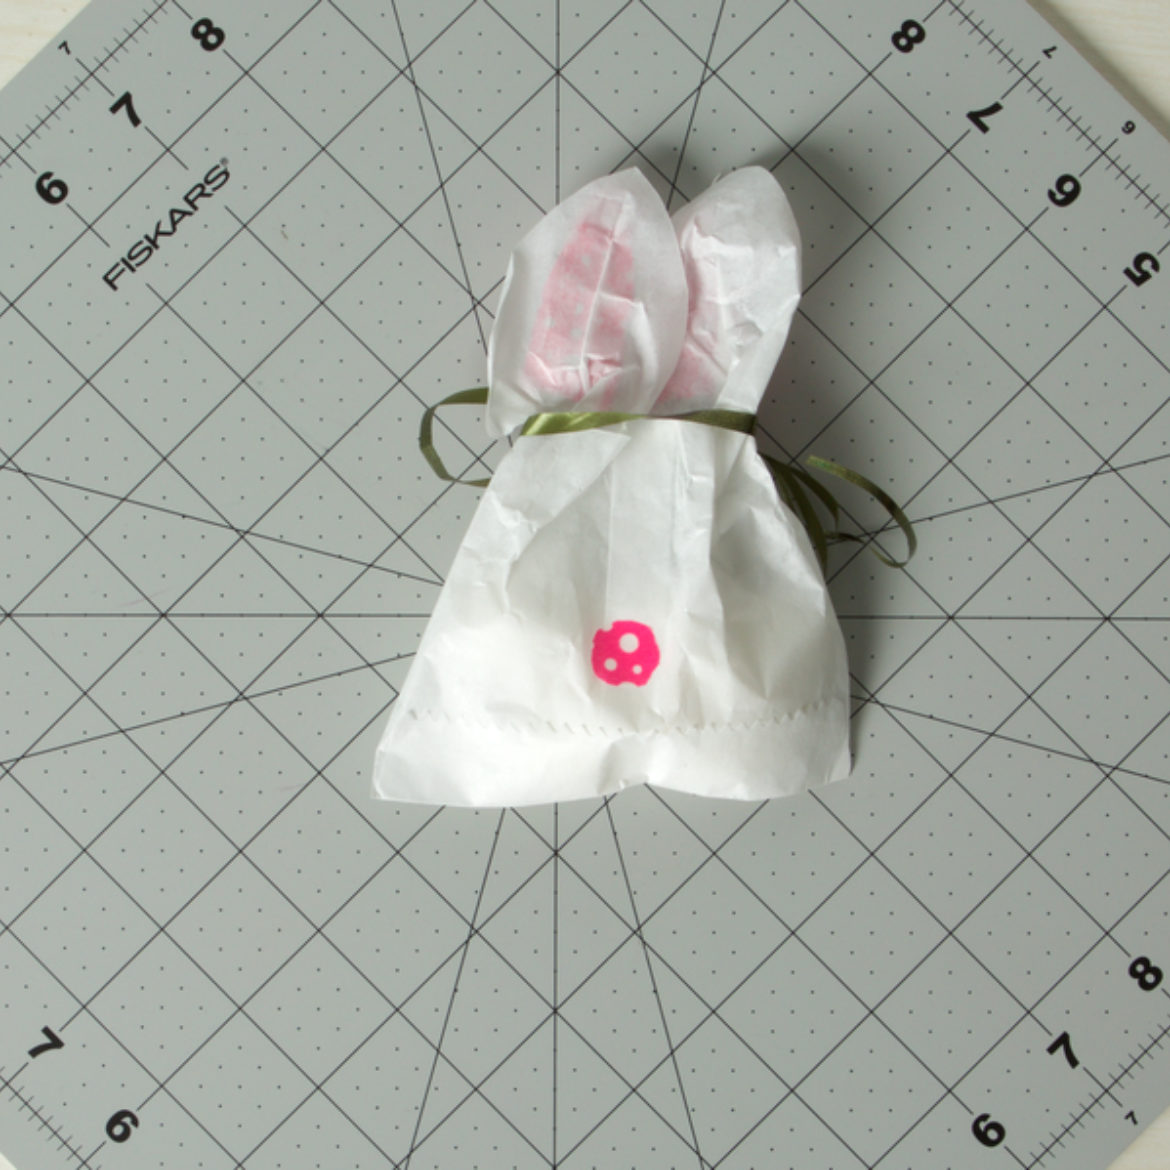 washi circle from stet 3 attached to the back of the bag to serve as a tail